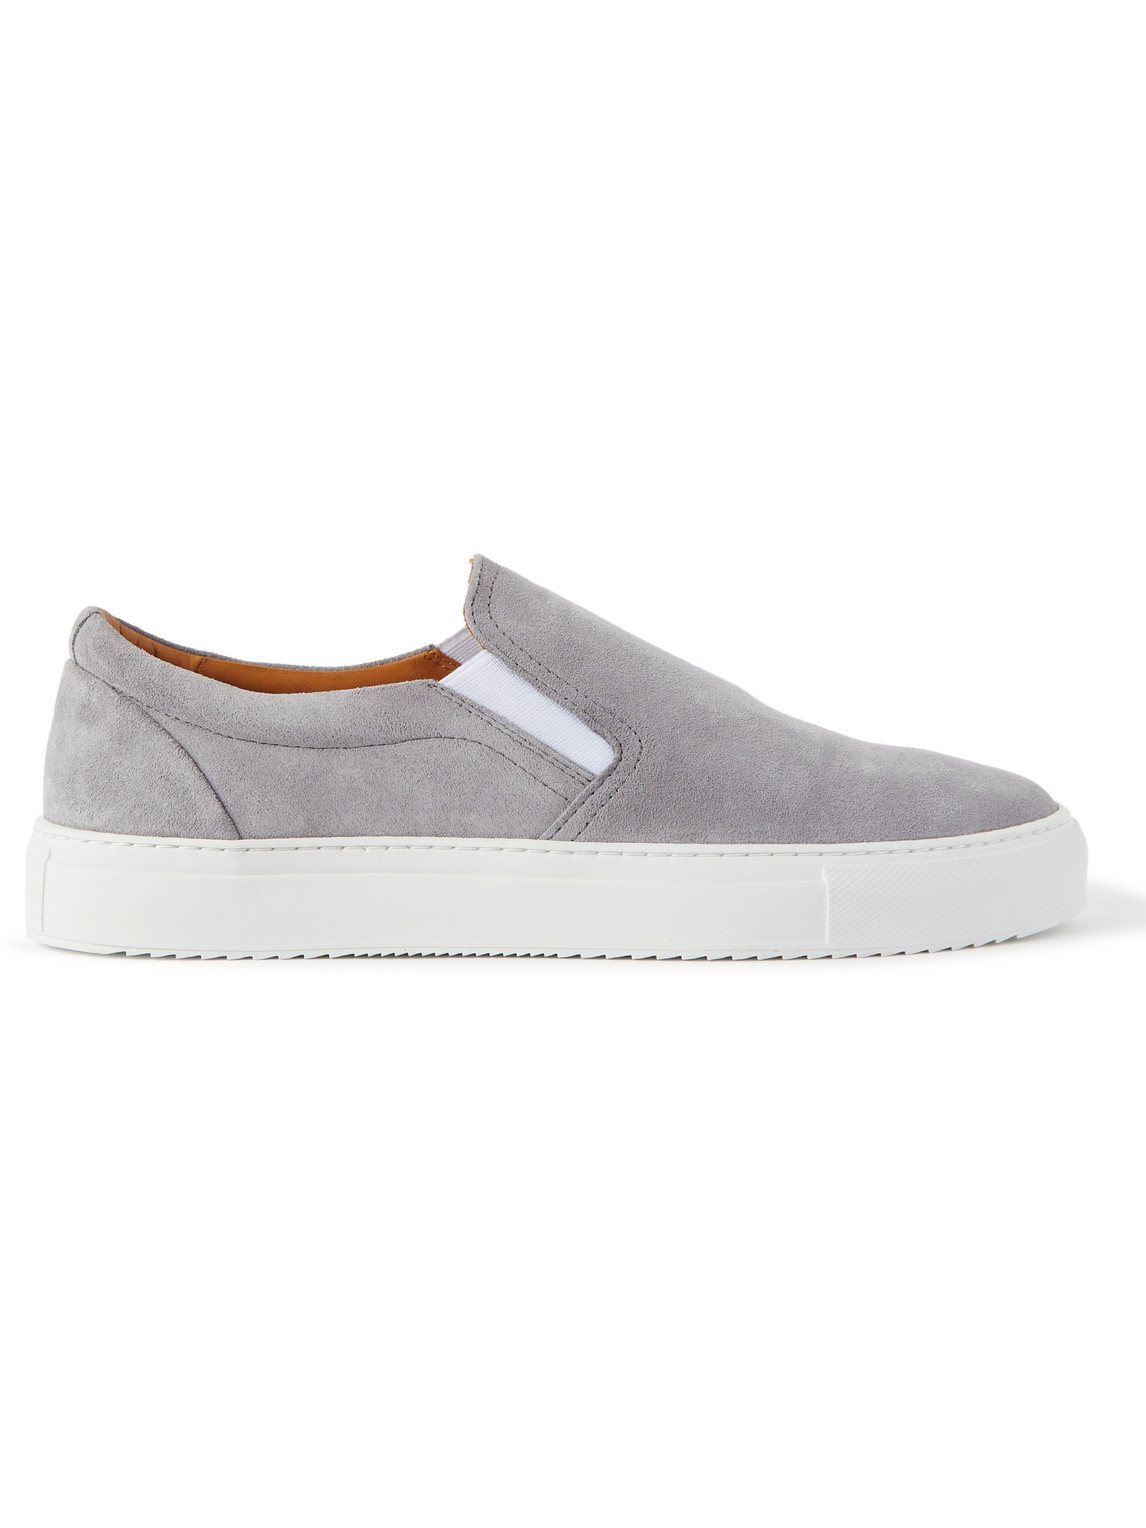 Mr P Regenerated Suede By Evolo® Slip-on Sneakers In Purple